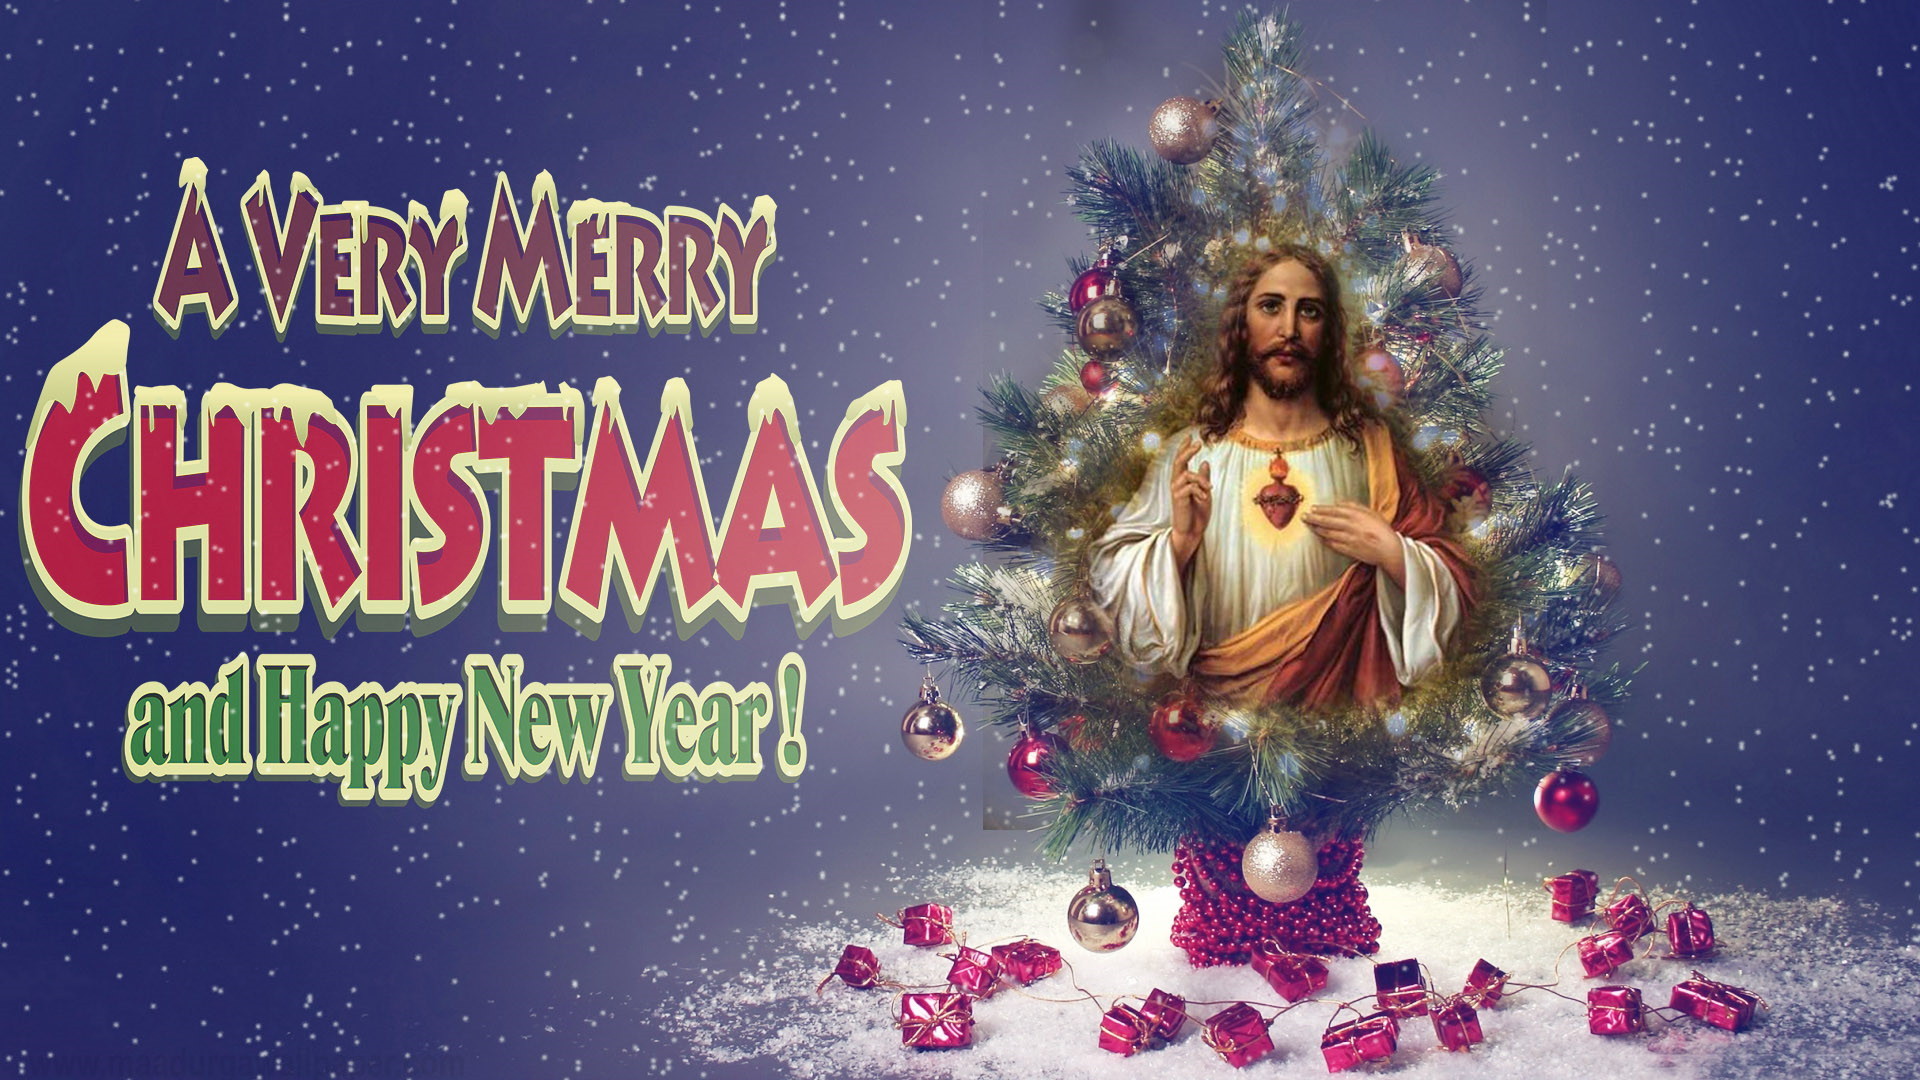 1920x1080 Baby Jesus Christmas wallpaper, beautiful photo & hd images download free  for tablet, desktop